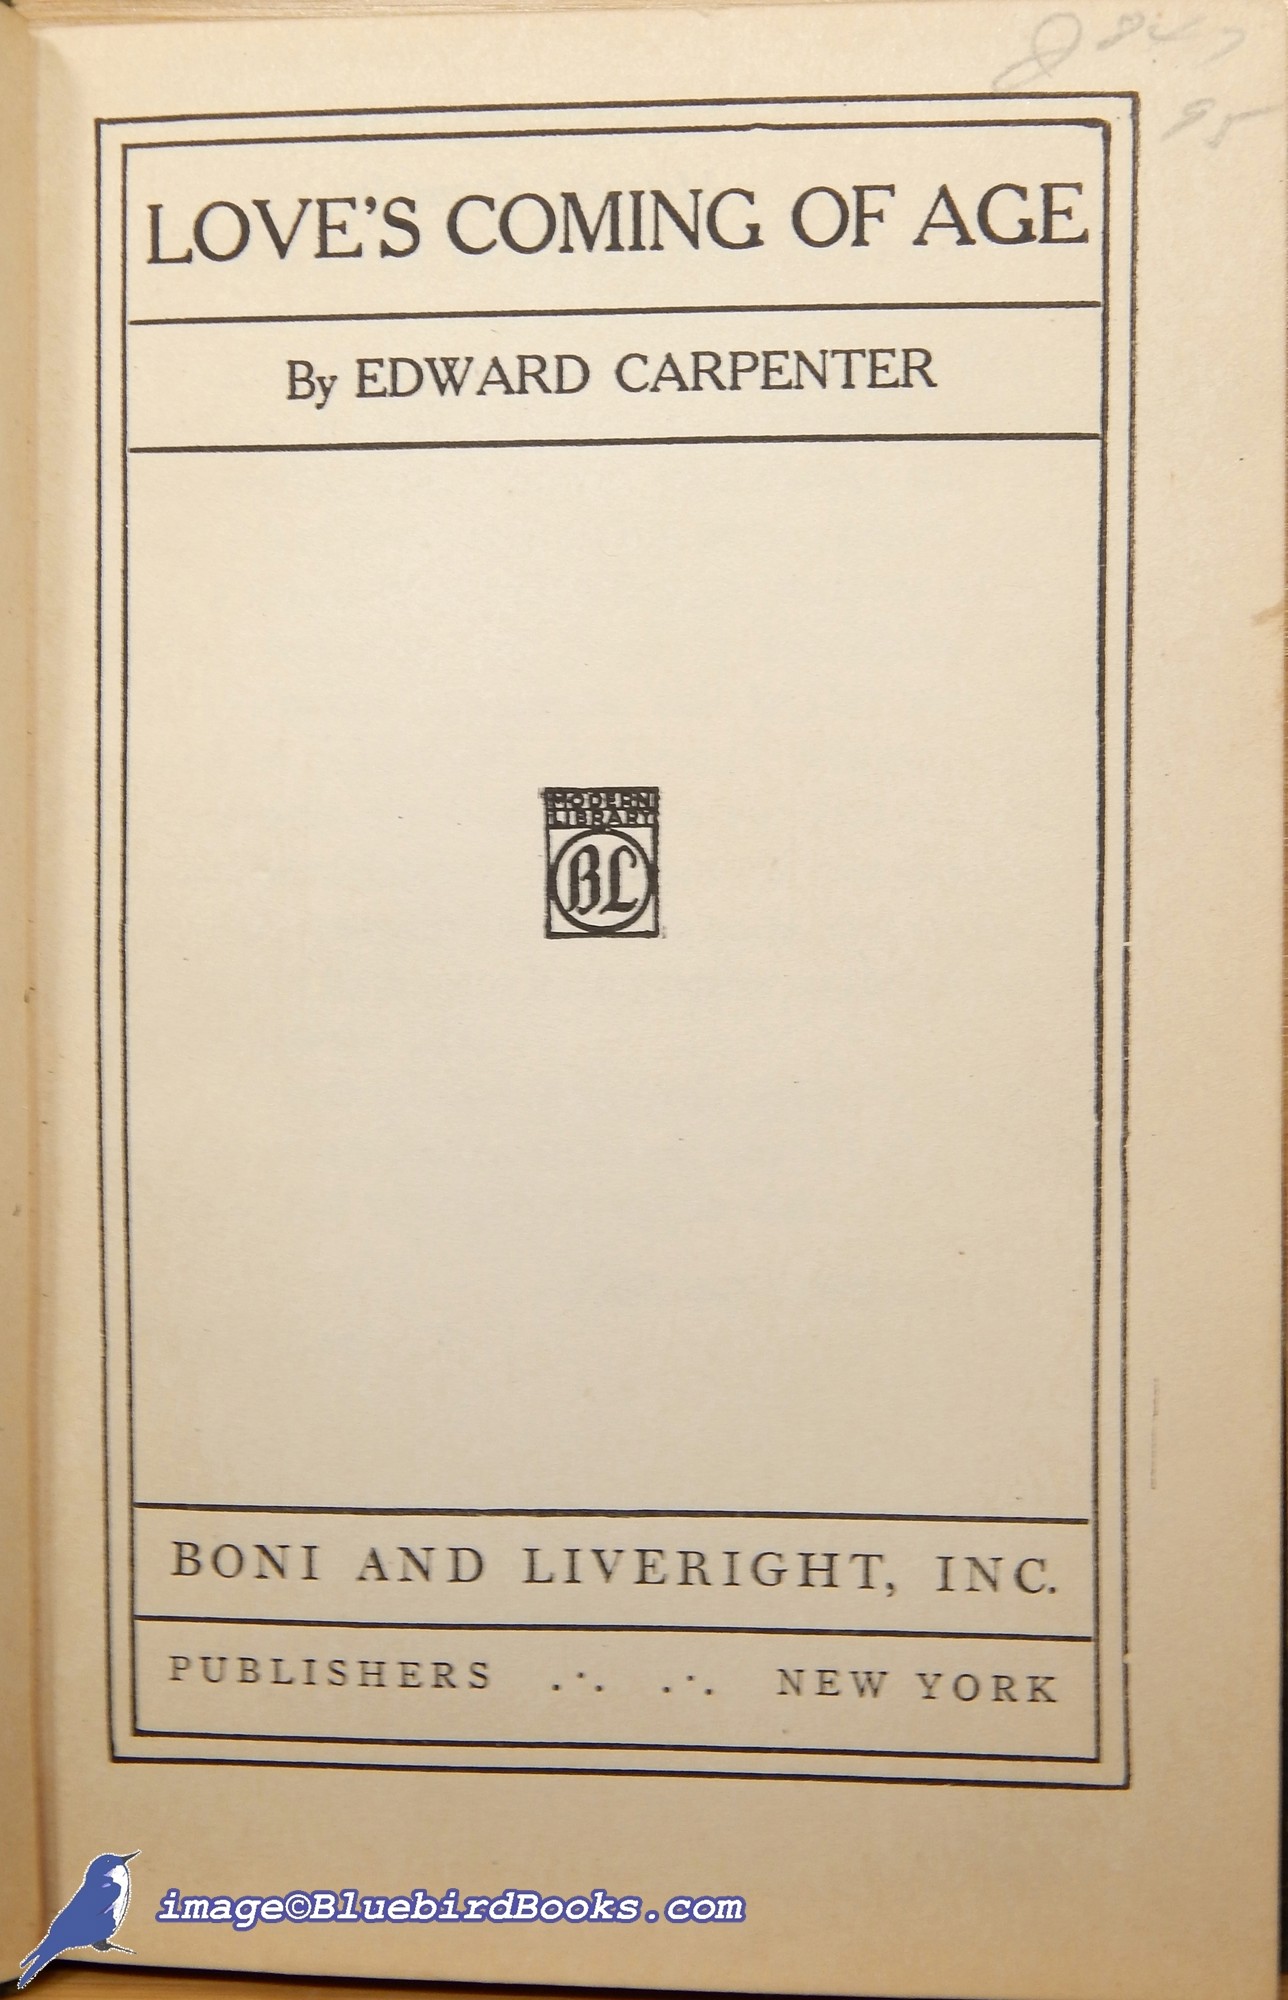 CARPENTER, EDWARD - Love's Coming of Age Modern Library Spine 2, ML #51. 1